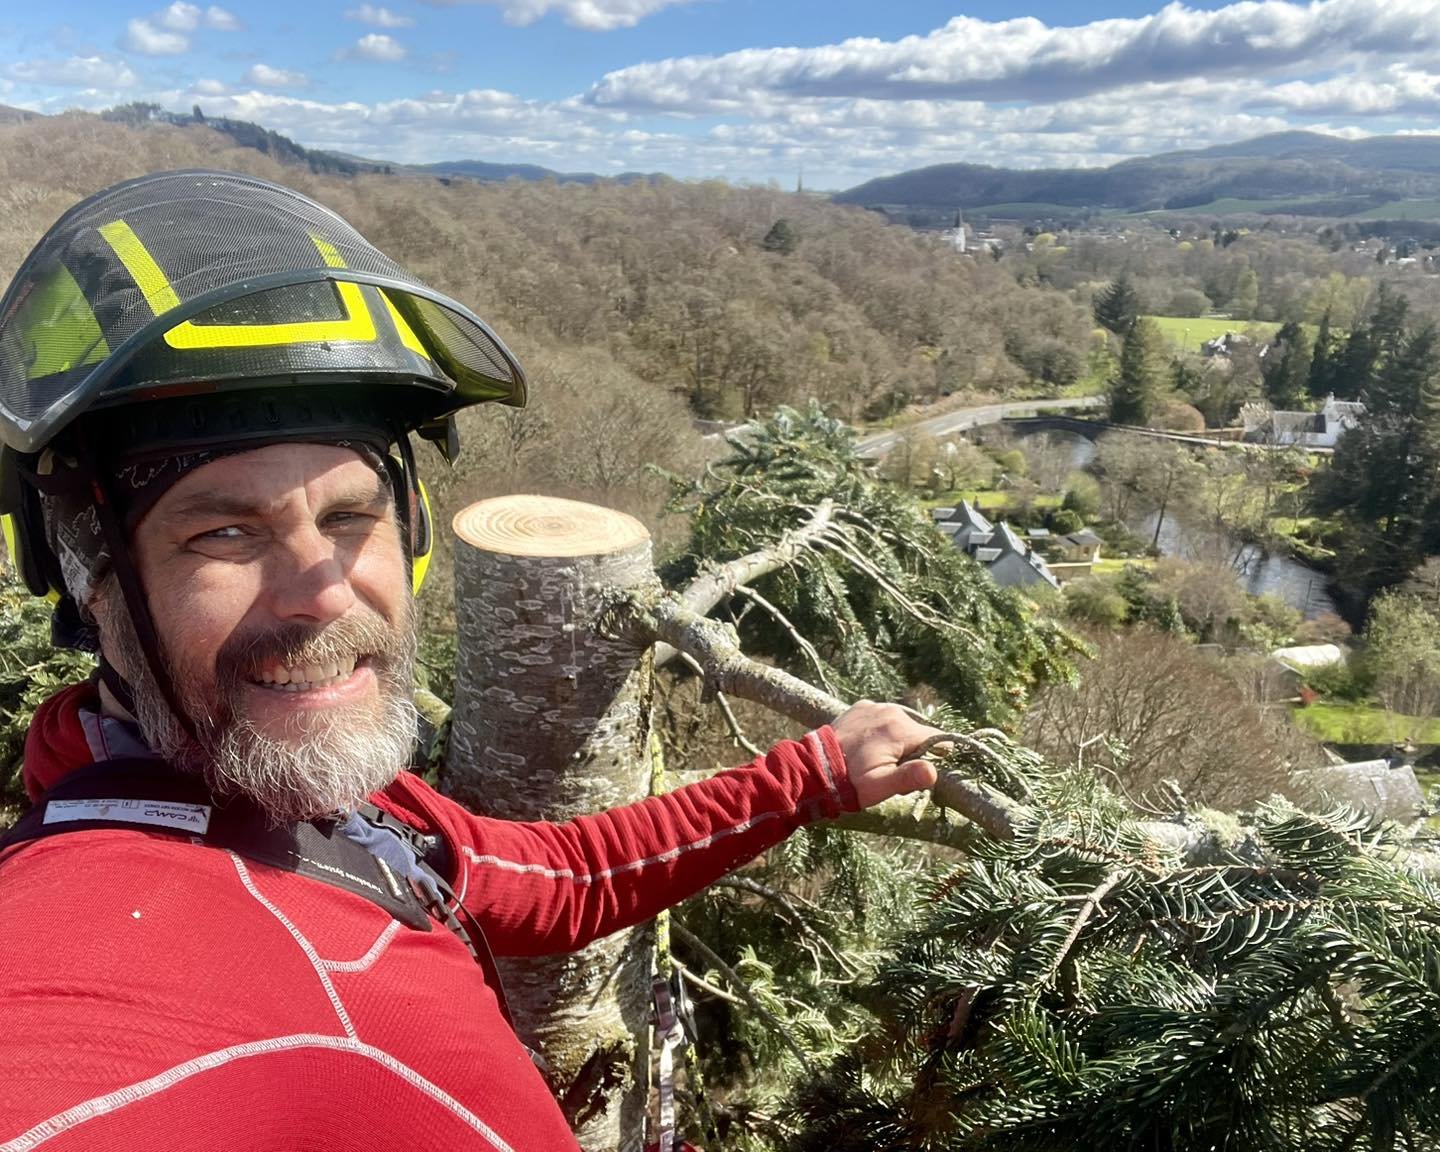 Hello from us at TristramTree.co.uk! 🪓🌲🌳🪵

I hope you are all enjoying spring now it&rsquo;s sprung, we have been busy with all sorts of different jobs from felling, to pruning and hedge work. It&rsquo;s been a great start to the year!

We have a